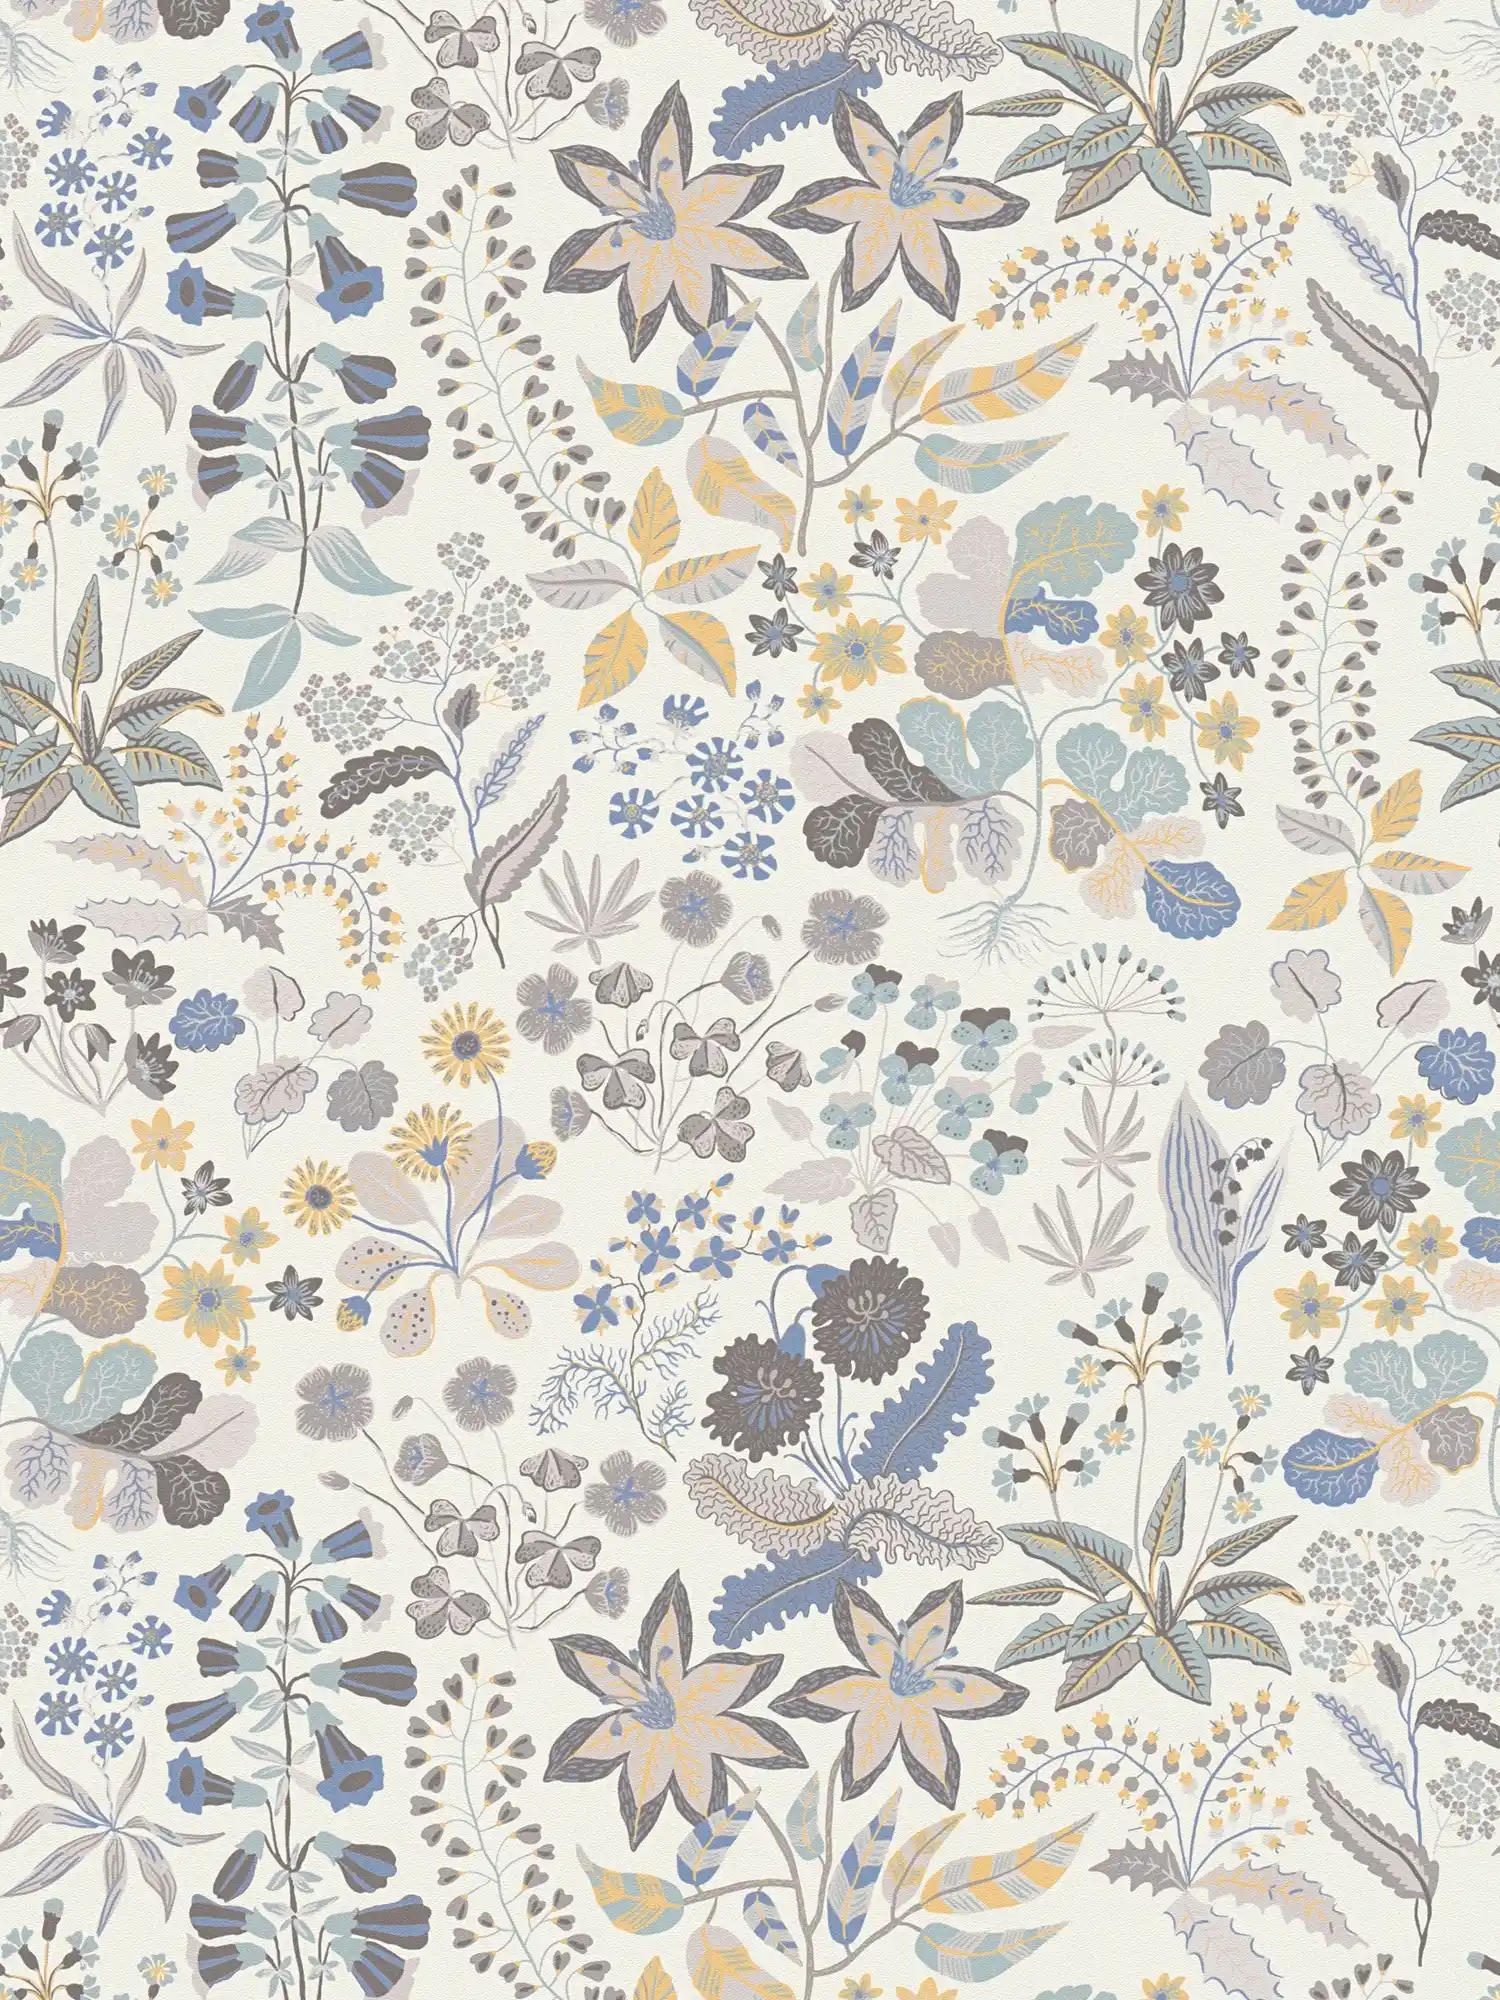 Non-woven wallpaper with detailed floral pattern - grey, blue, cream
